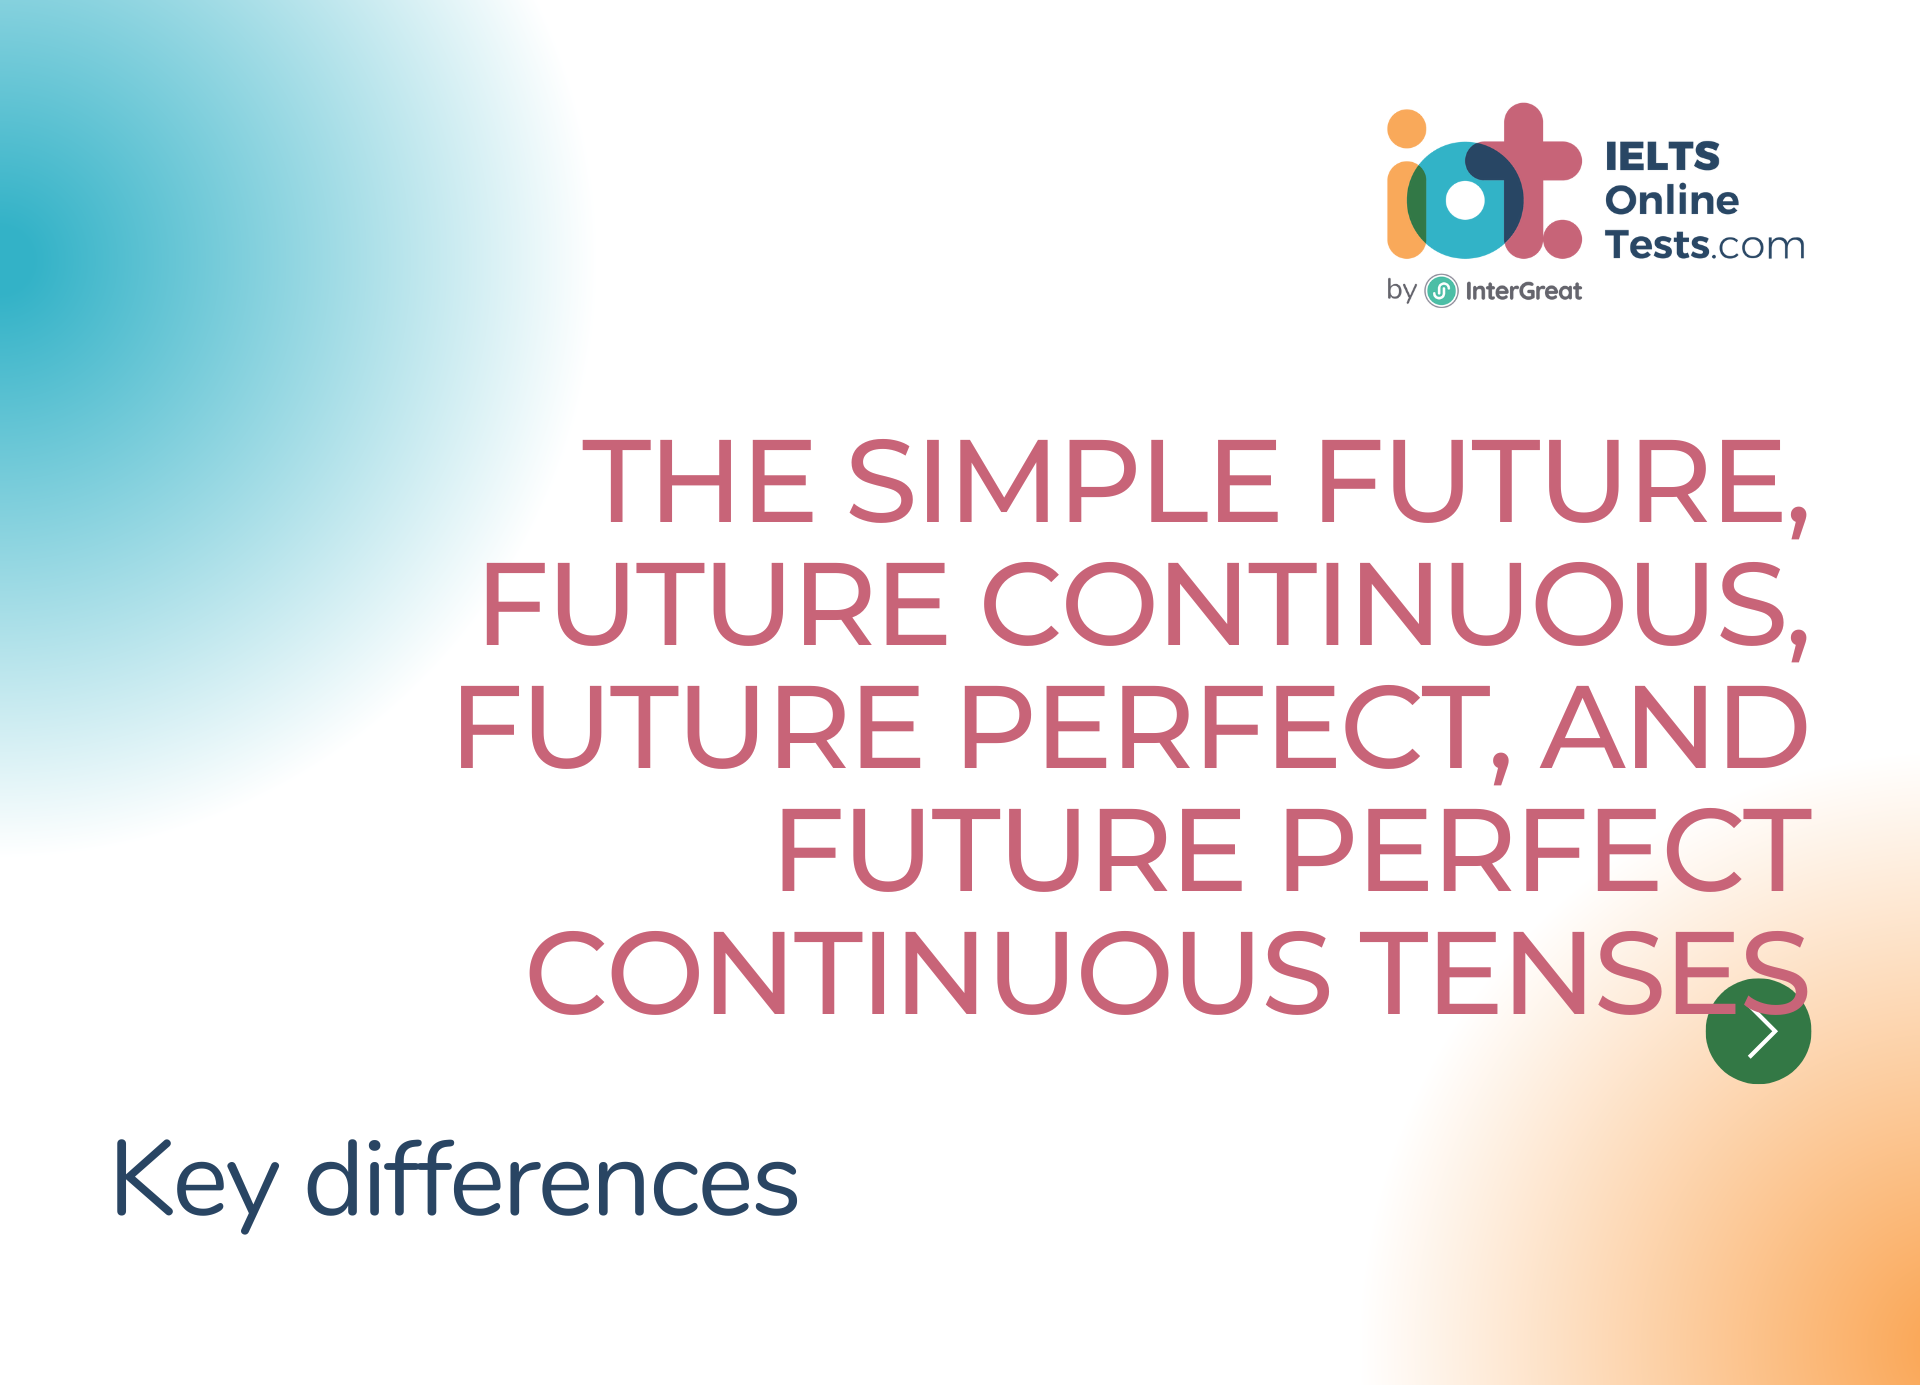 Key differences between the simple future, future continuous, future perfect, and future perfect continuous tenses